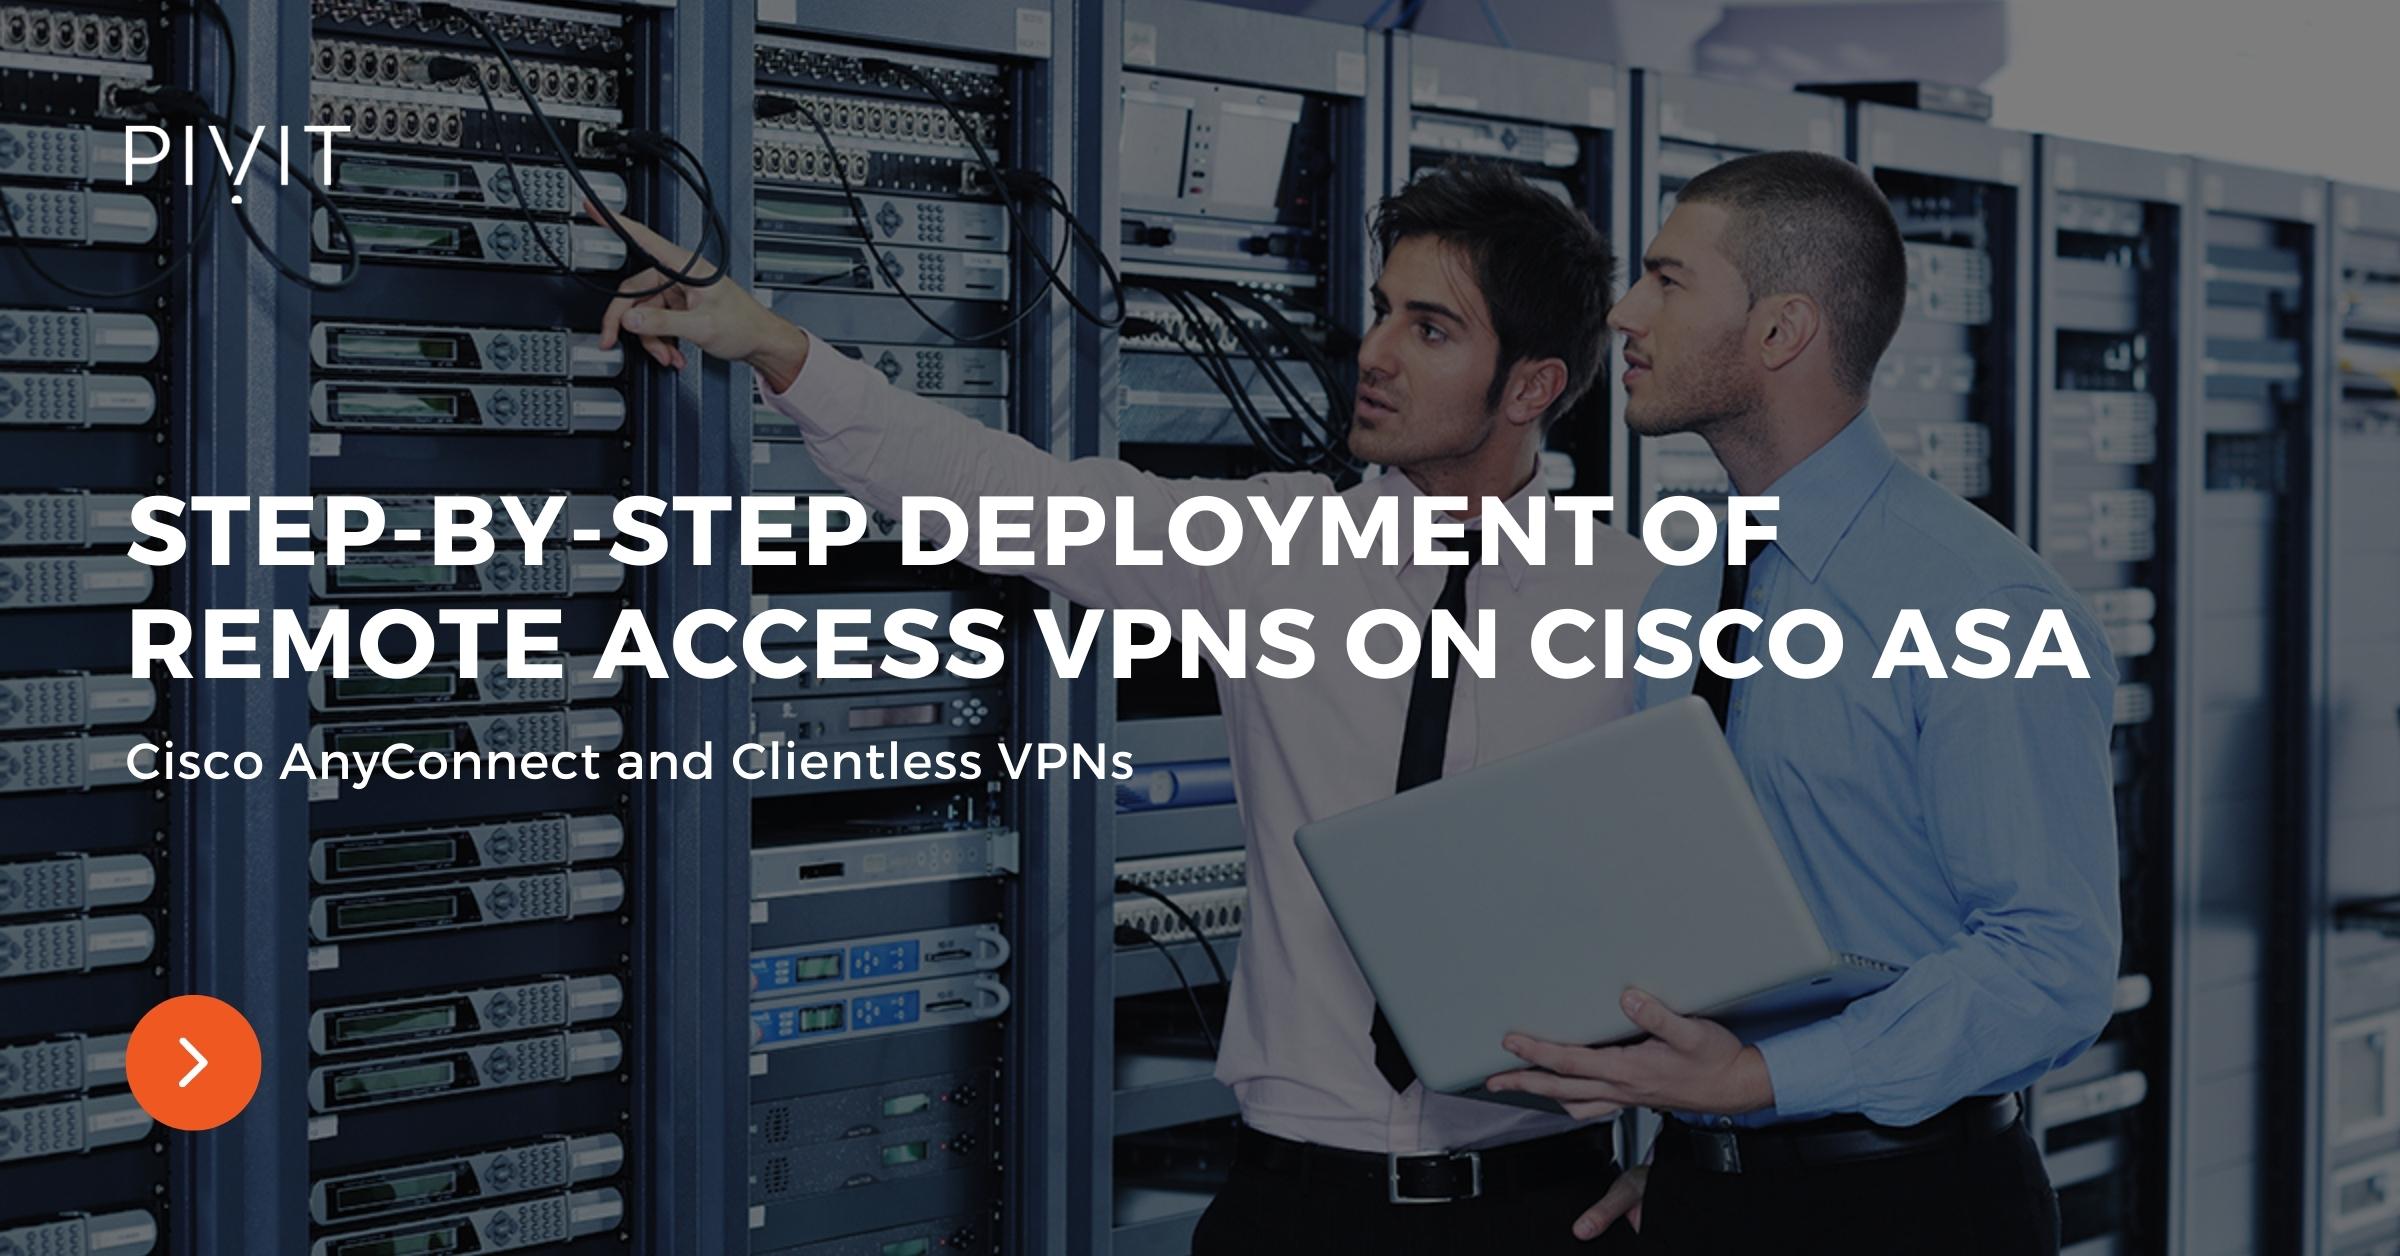 Step-by-Step Deployment of Remote Access VPNs on Cisco ASA - Cisco AnyConnect and Clientless VPNs